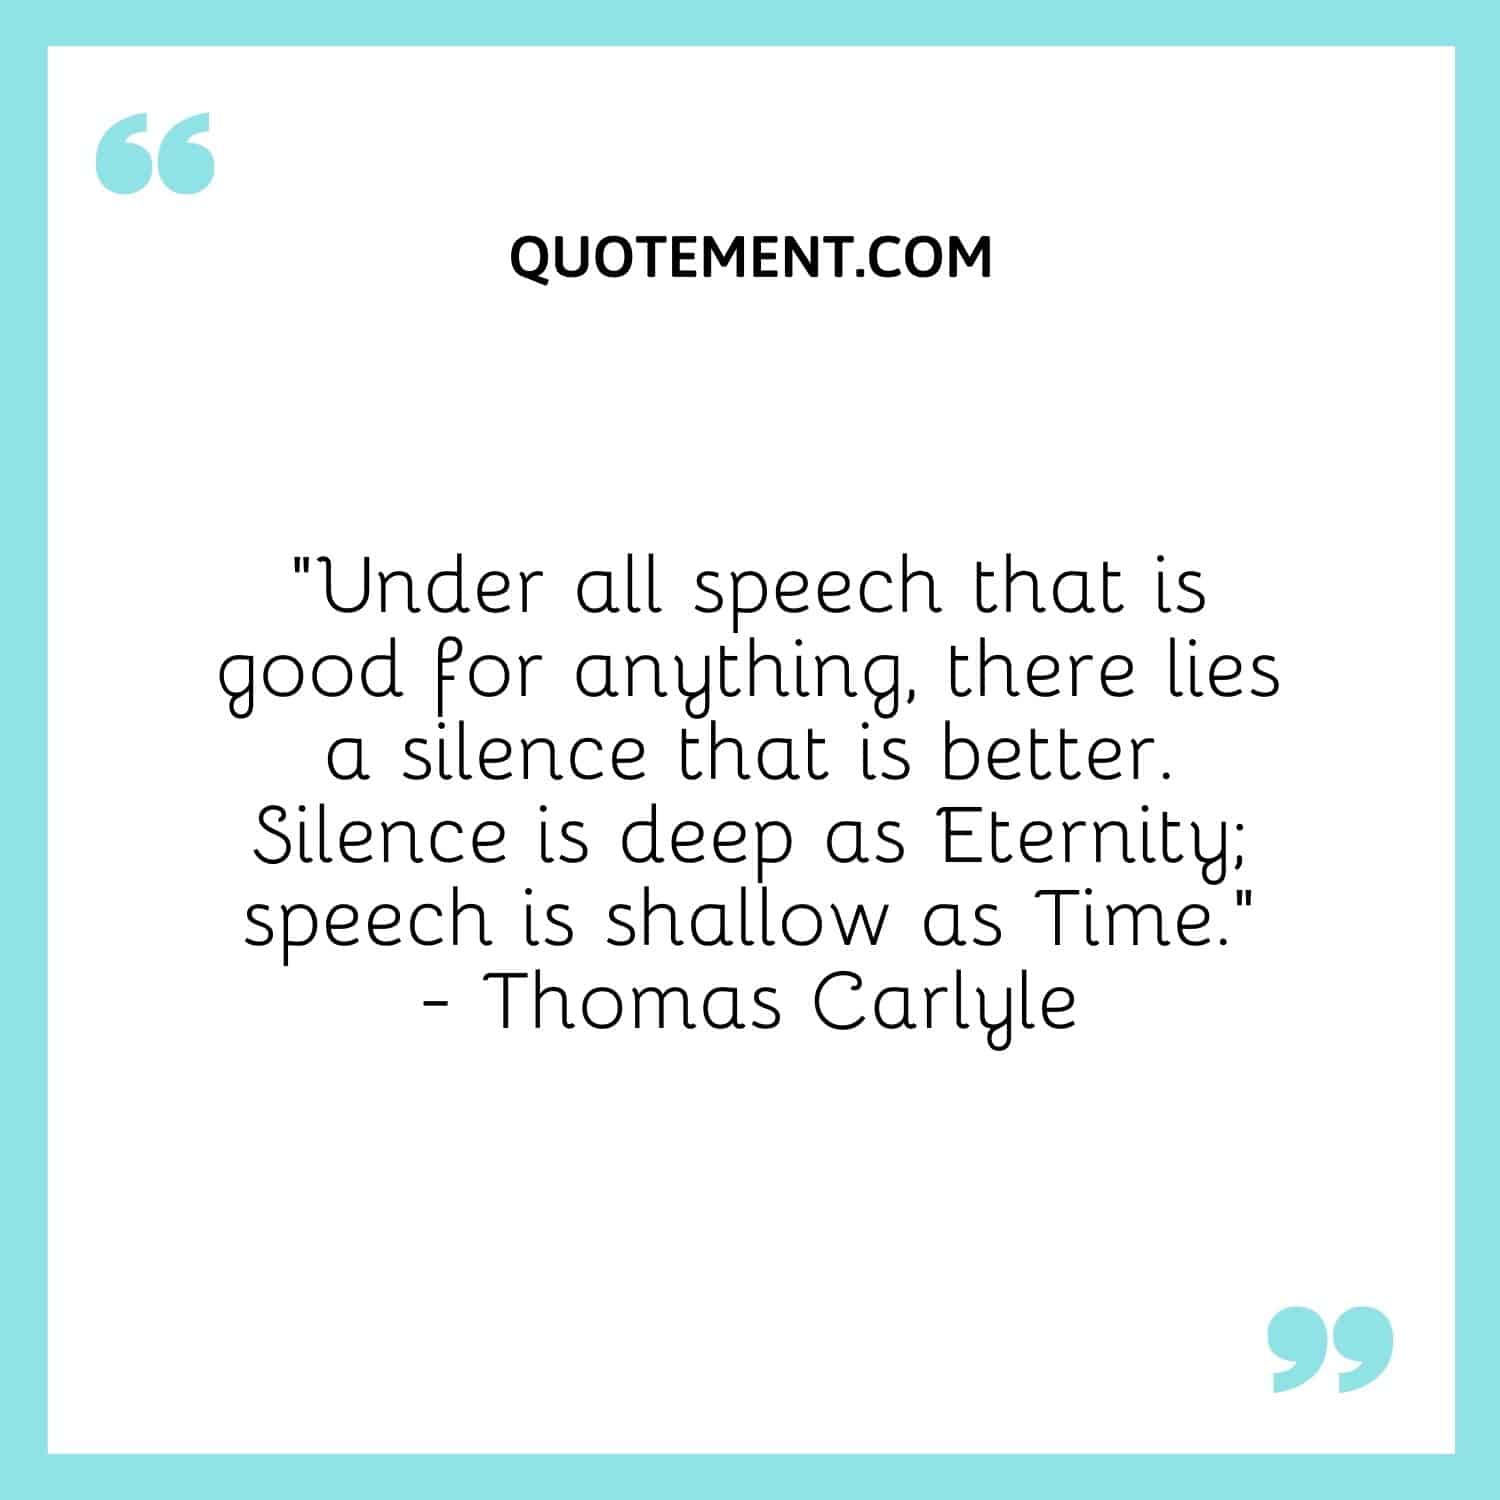 “Under all speech that is good for anything, there lies a silence that is better. Silence is deep as Eternity; speech is shallow as Time.” — Thomas Carlyle